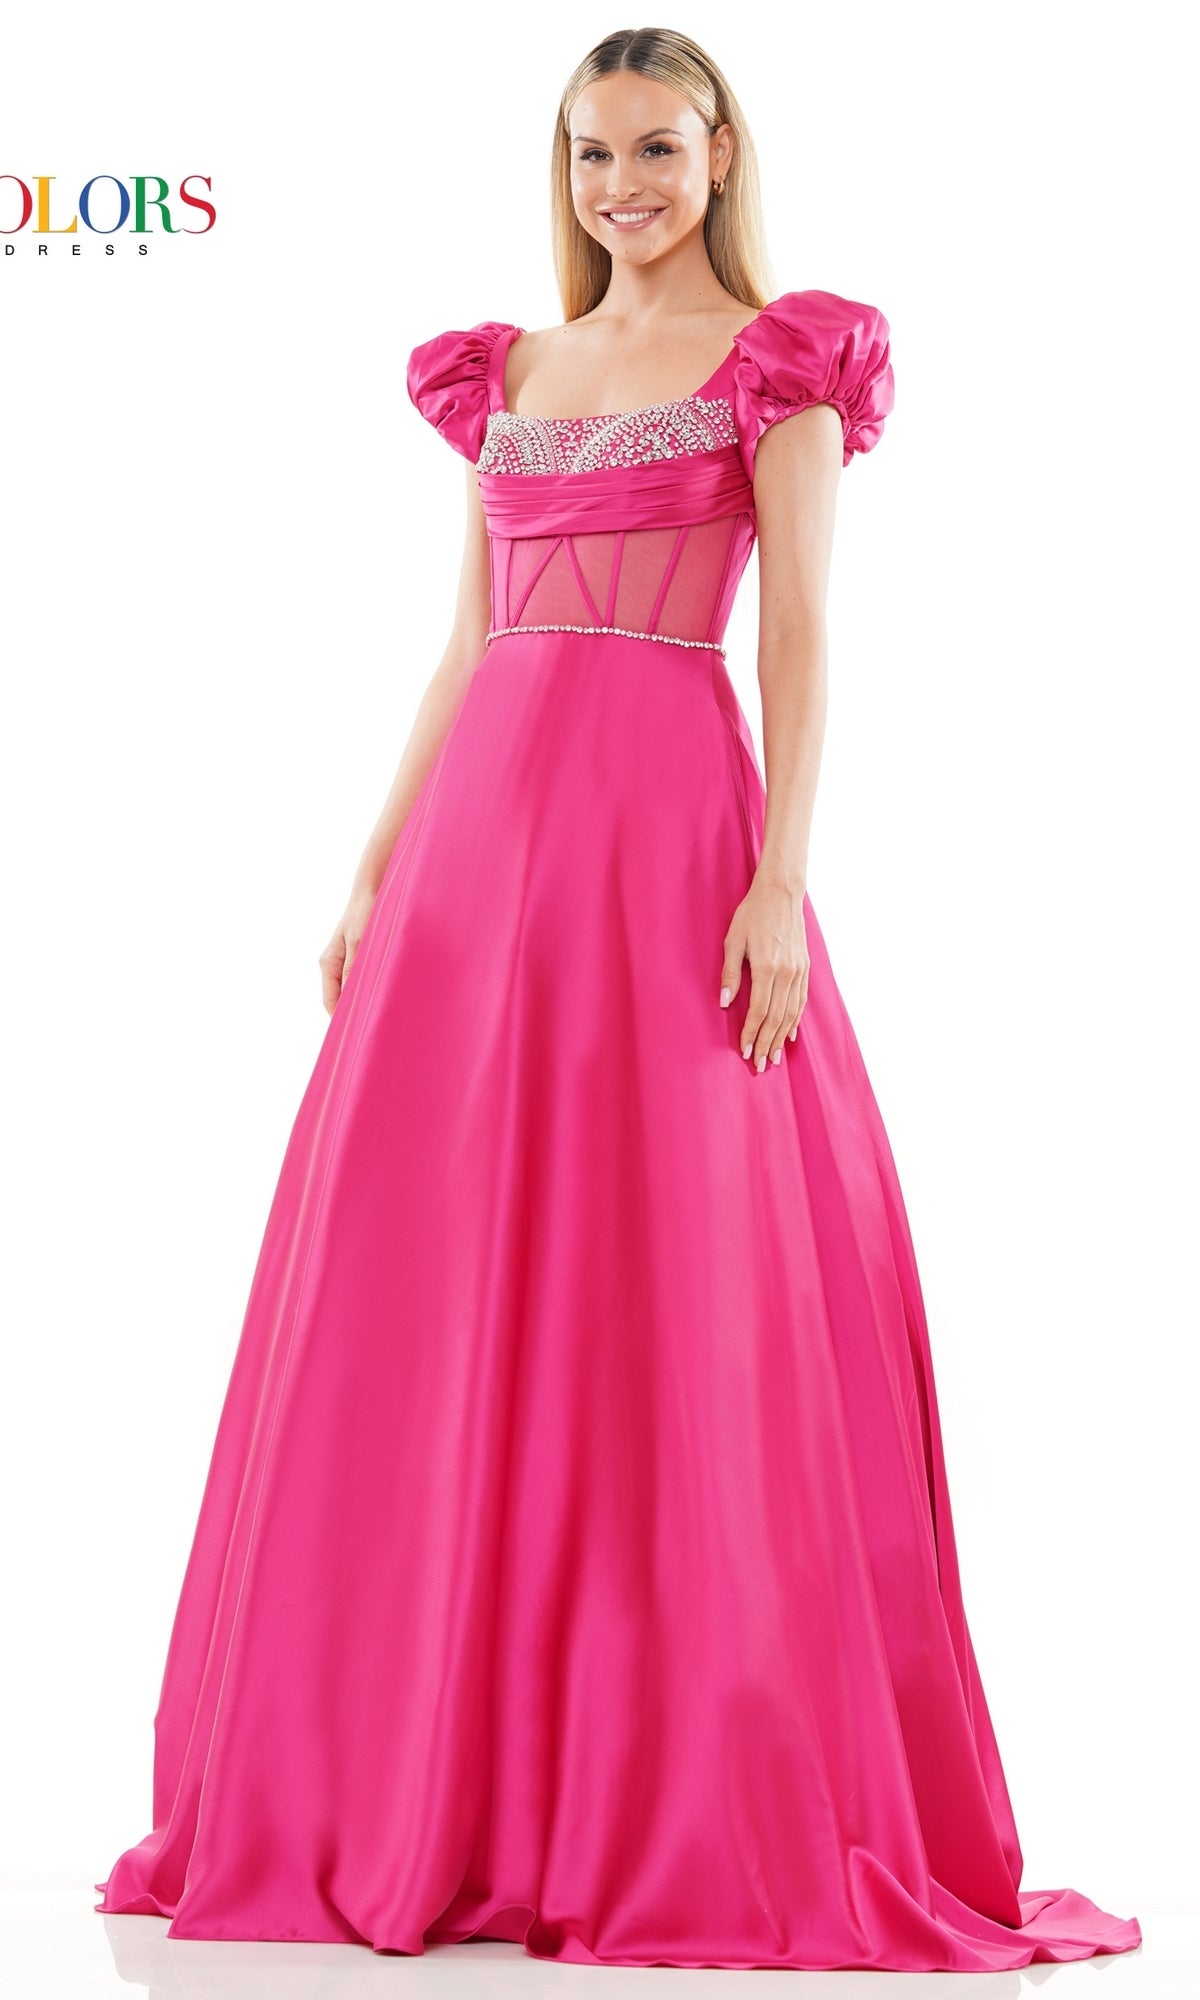 Colors Dress Puff-Sleeve Formal Ball Gown 3249